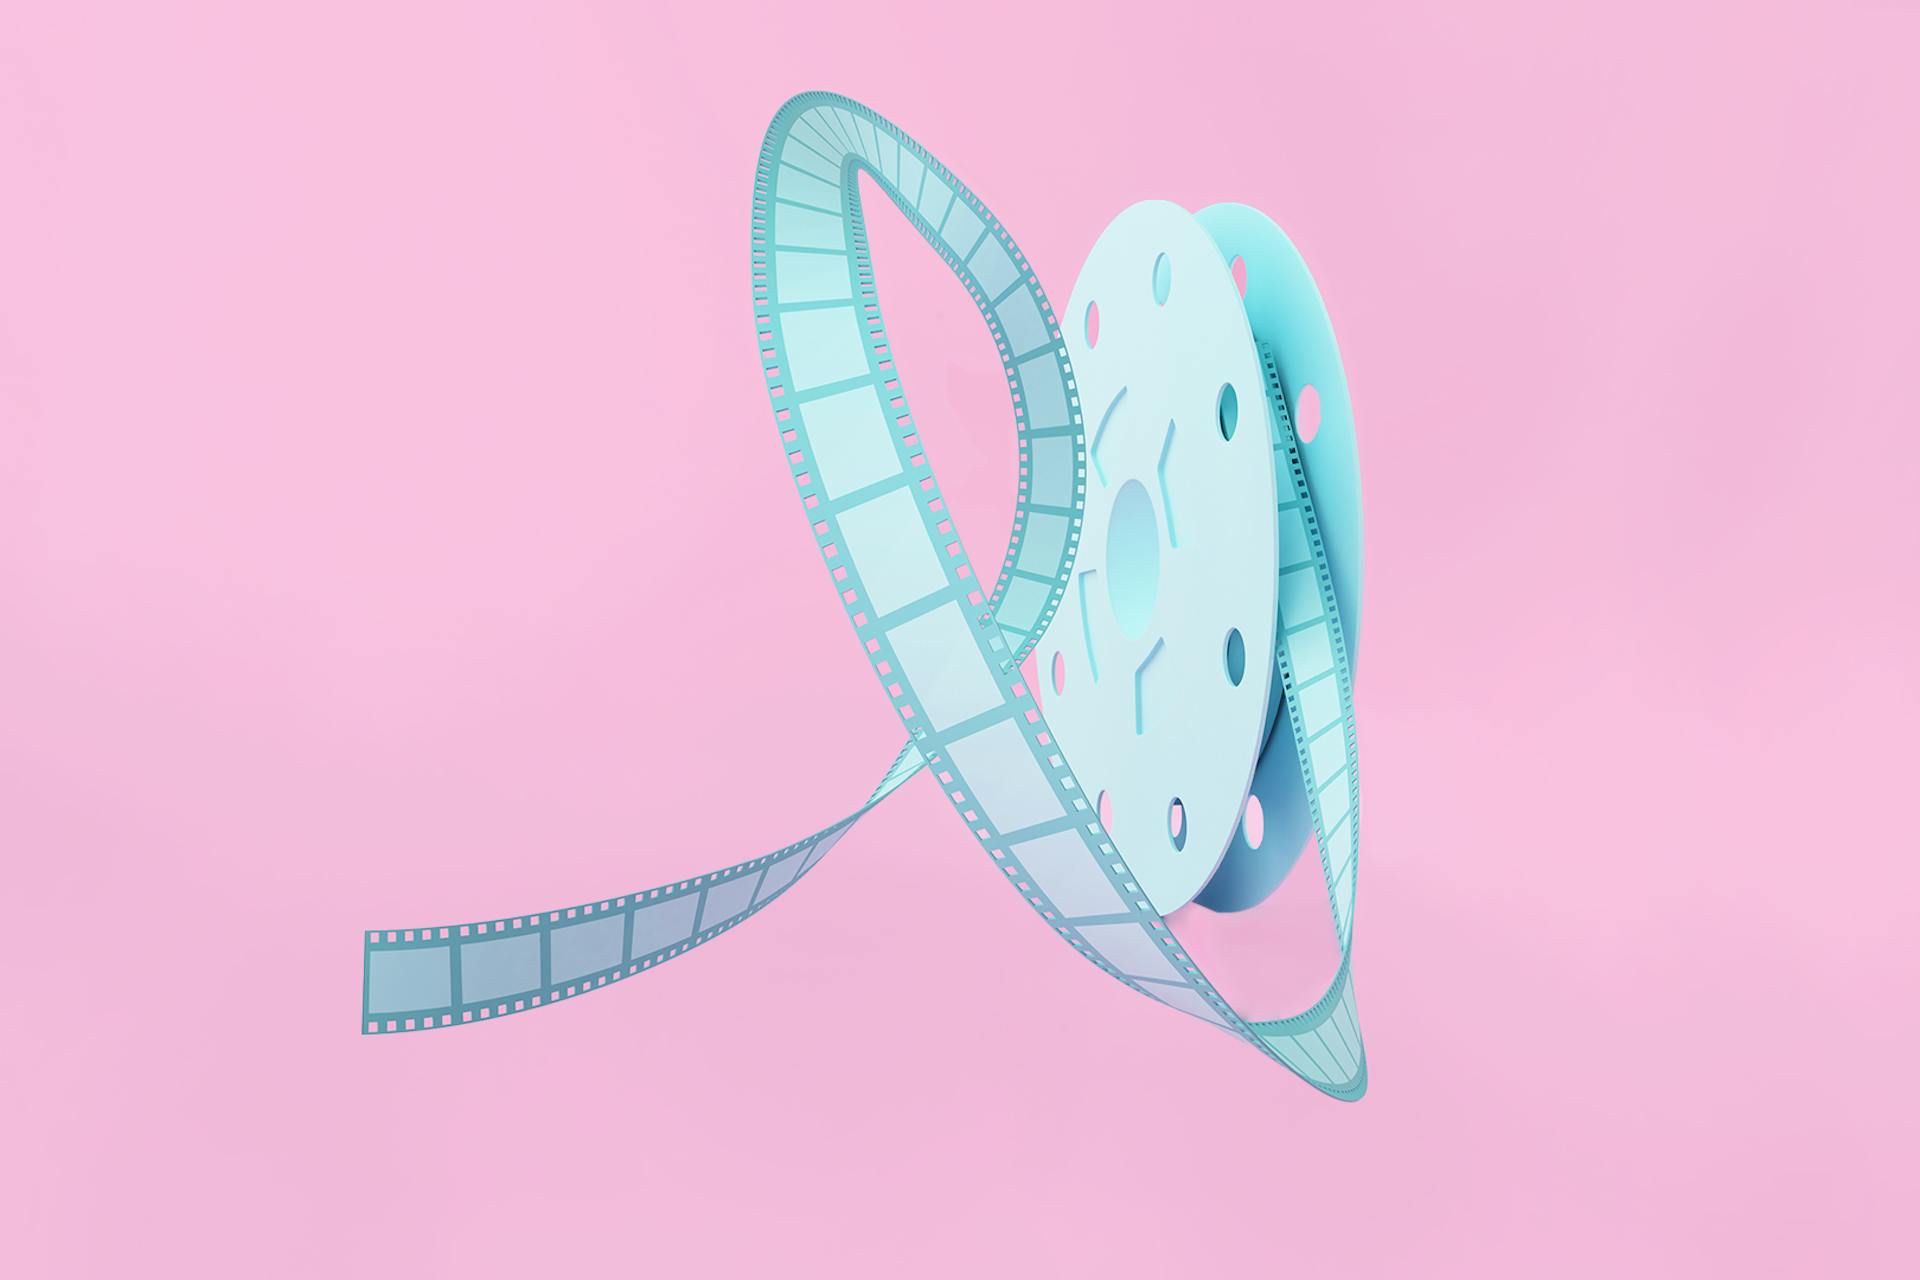 Image of a light blue old-fashioned film reel with film coming out, on a pink background. How to create and use Instagram Reels blog post